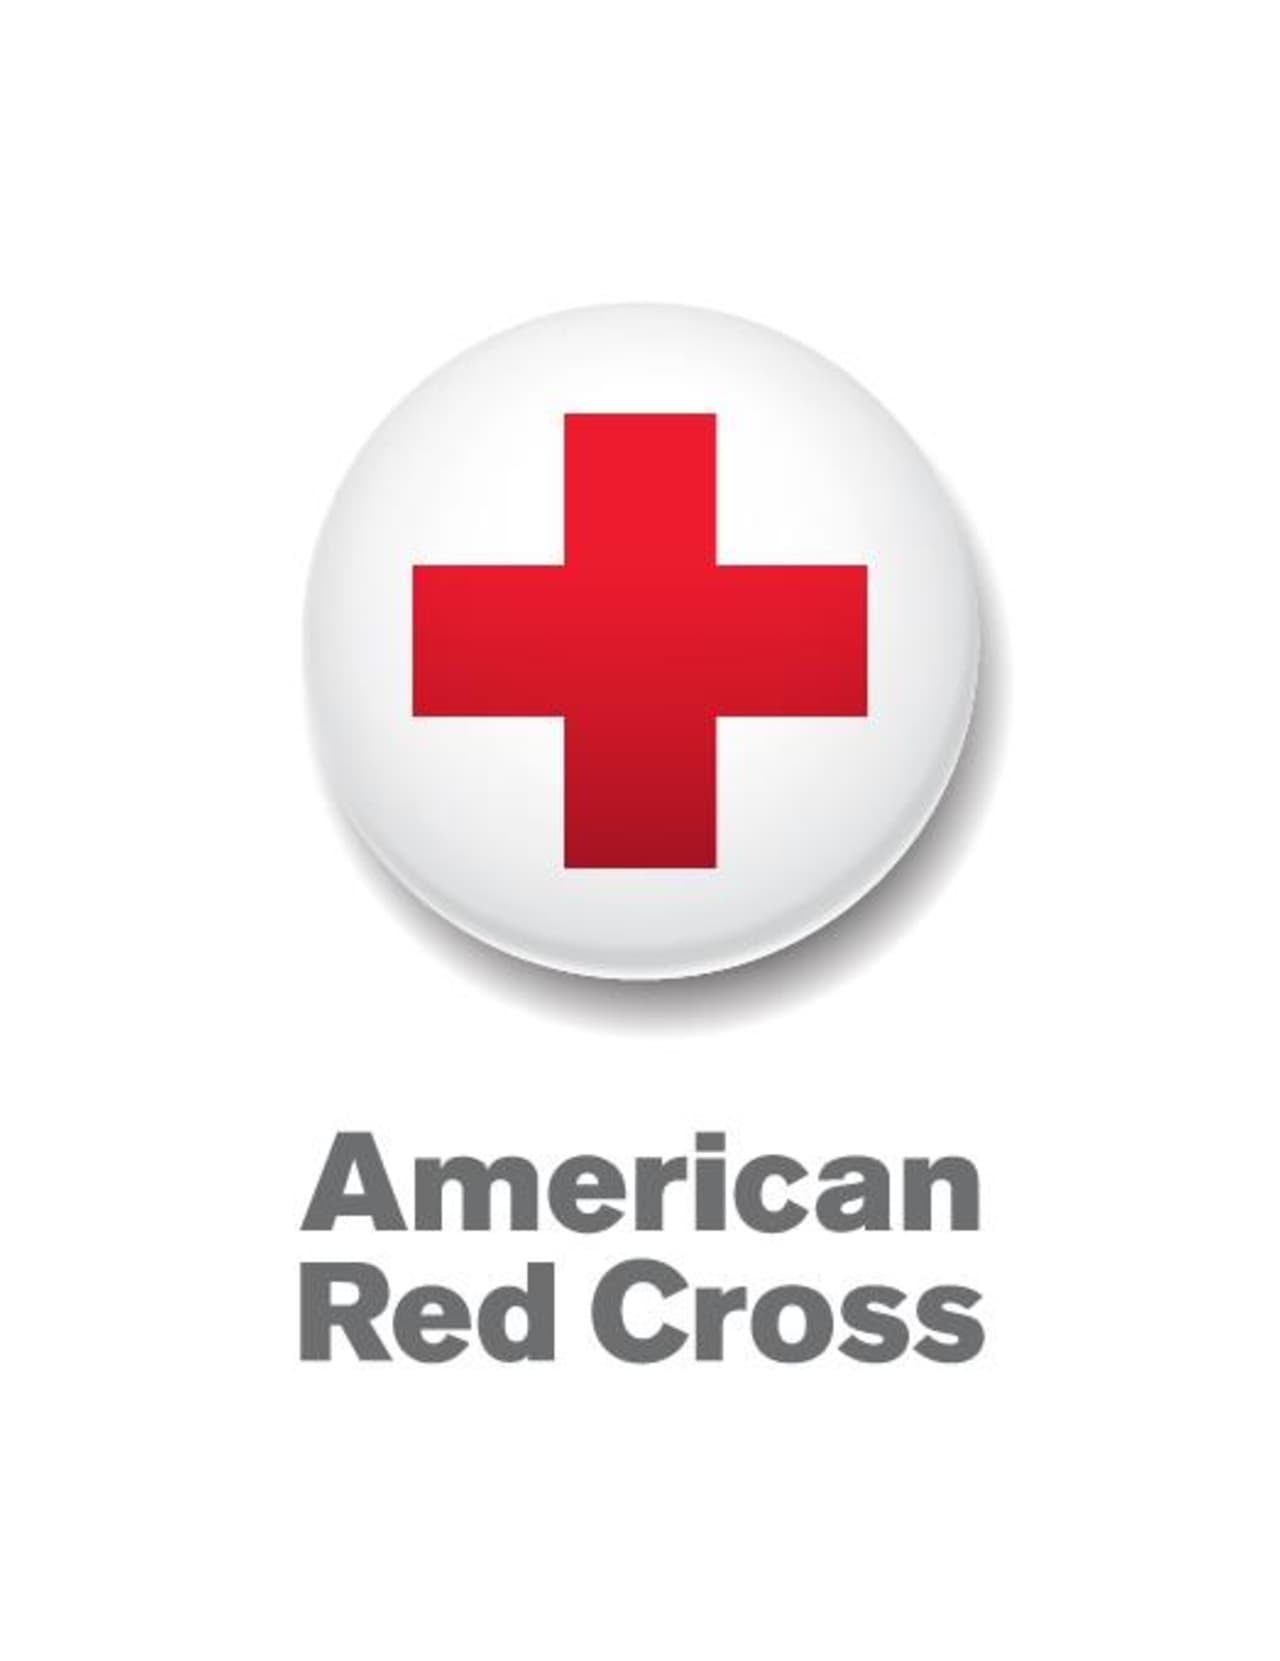 The library in New Canaan will be hosting a Red Cross Blood Drive.